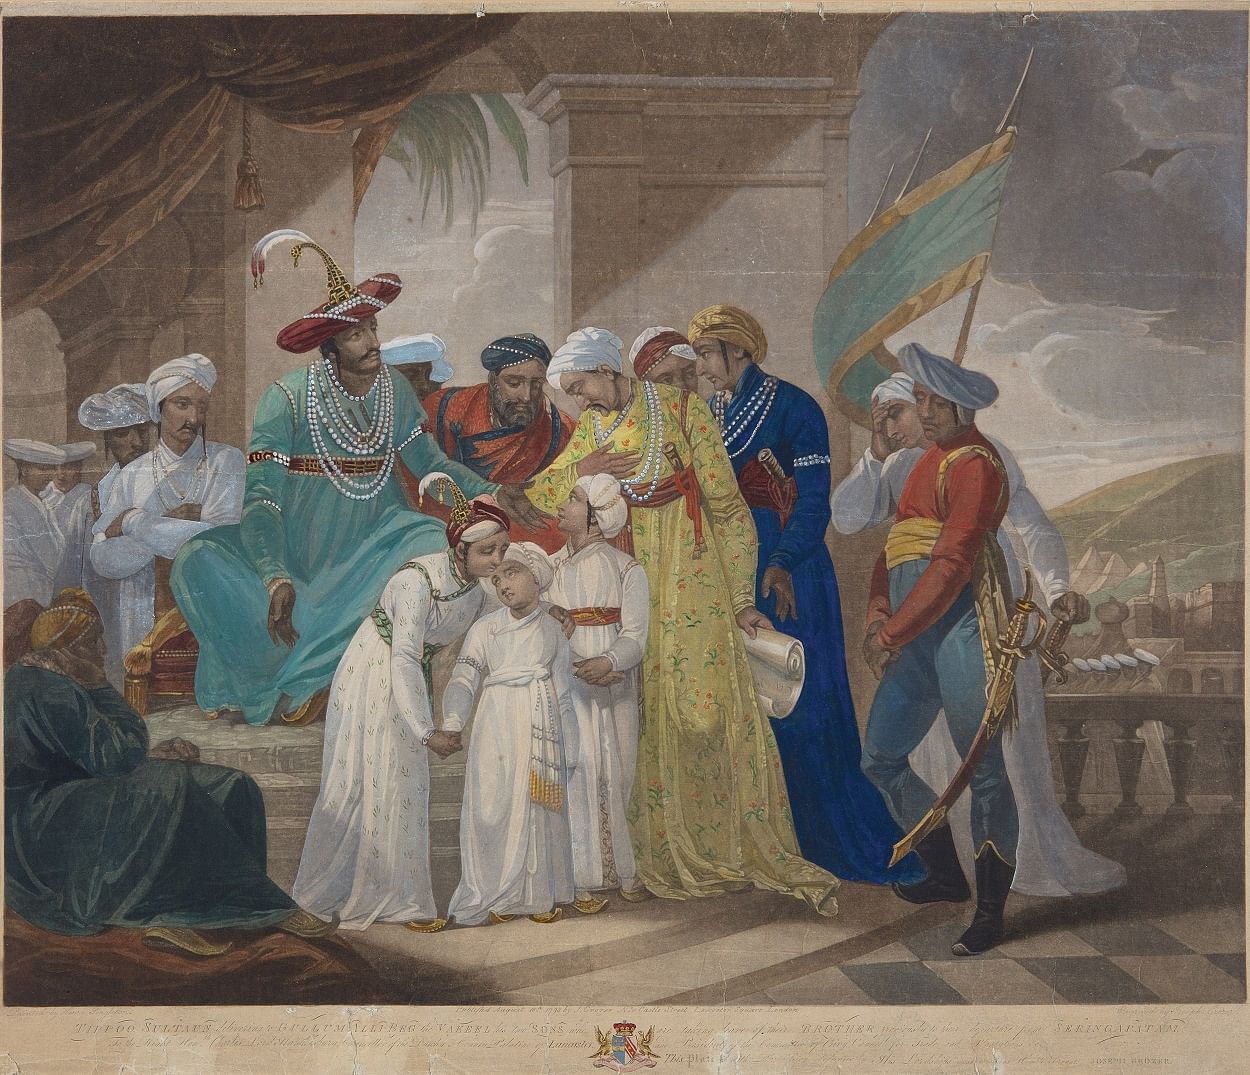 Henry Singleton (1766-1839), engraved by Joseph Grozer (1755-99), Tippoo Sultaun delivering to Gullum Alli Beg the Vakeel his sons who are taking leave of their brother previous to their departure from Seringapatam, 1793, Mezzotint, tinted with watercolour on paper | Shivani Benjamin, DAG, The Claridges/New Delhi